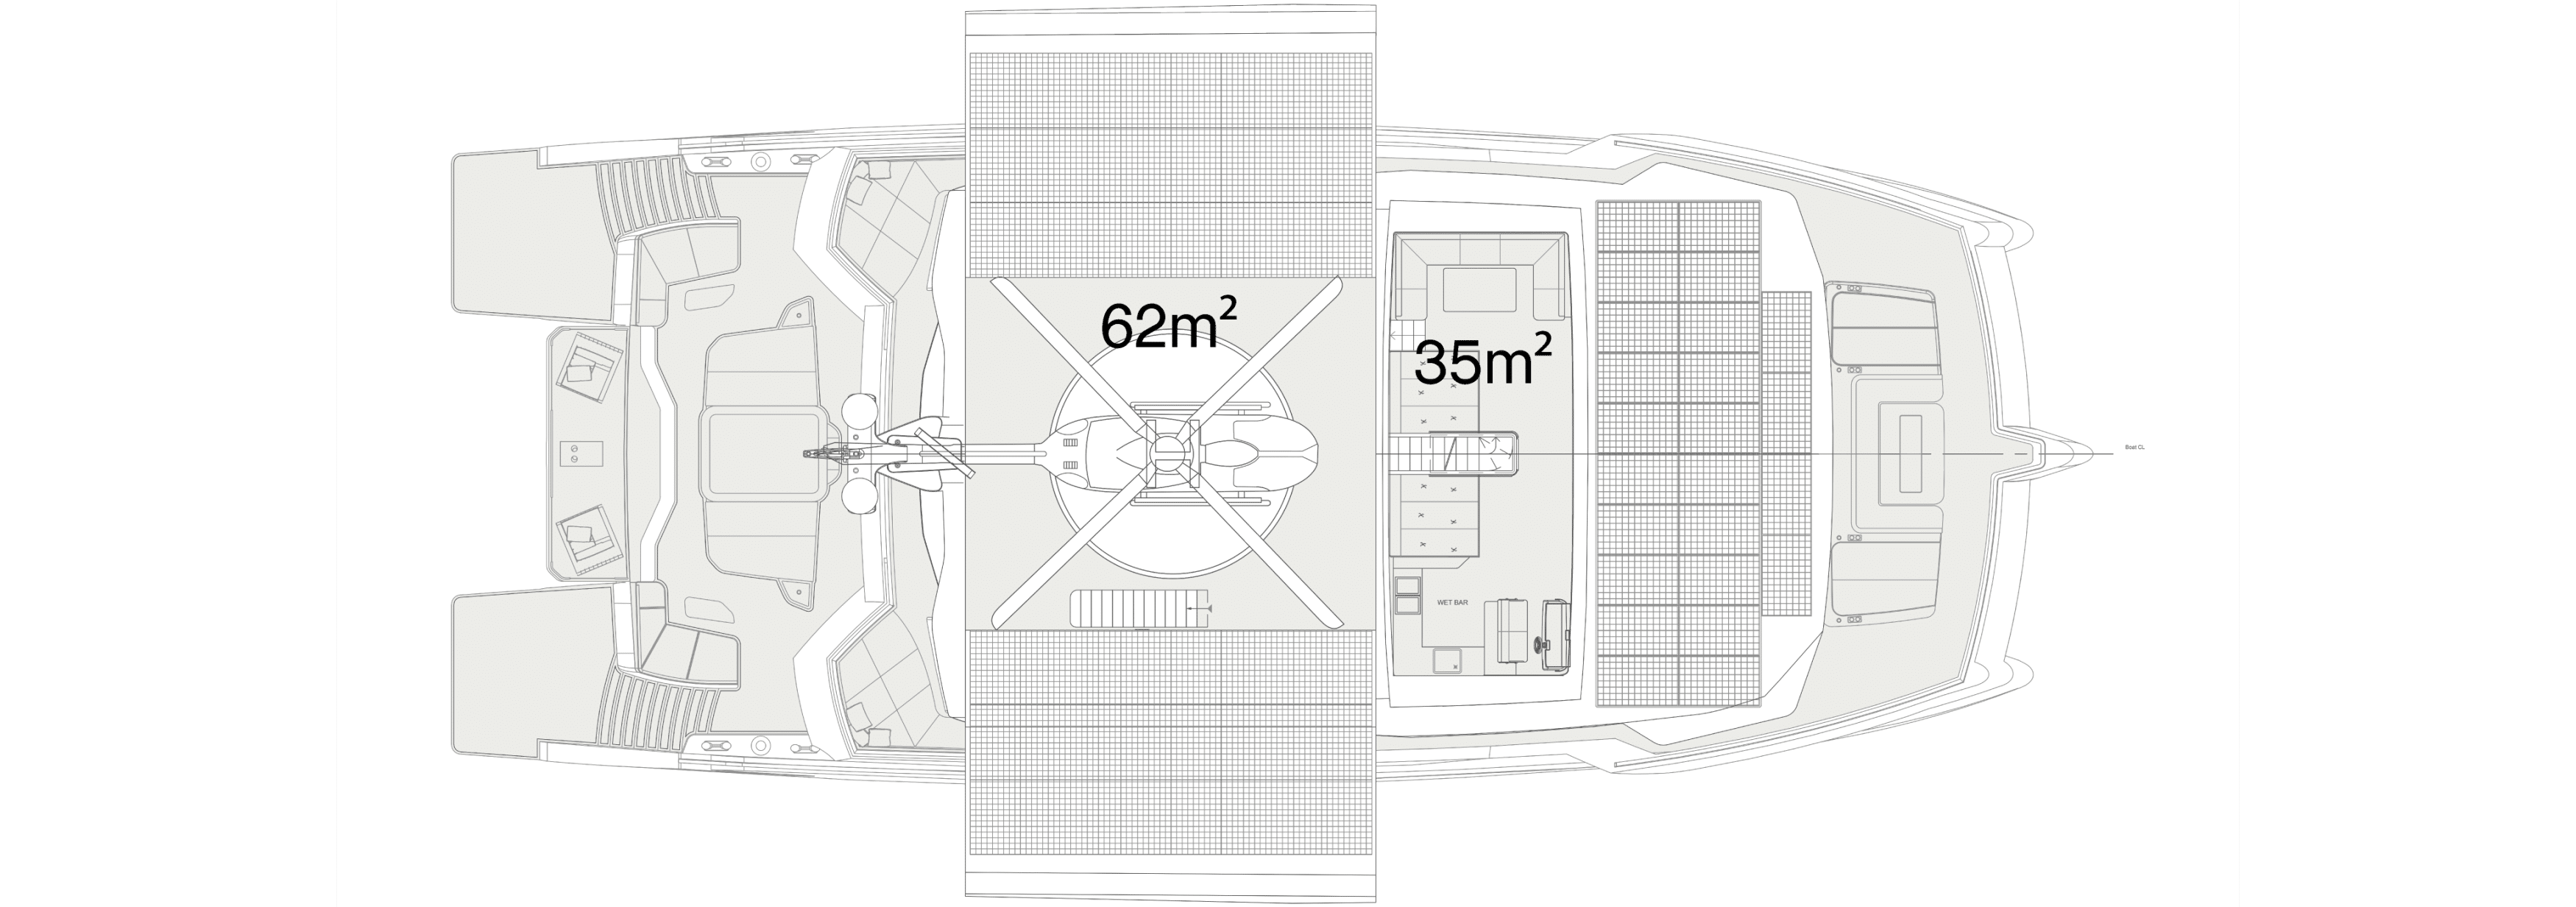 flybrifge helipad plan of a Silent 120 yacht with measures